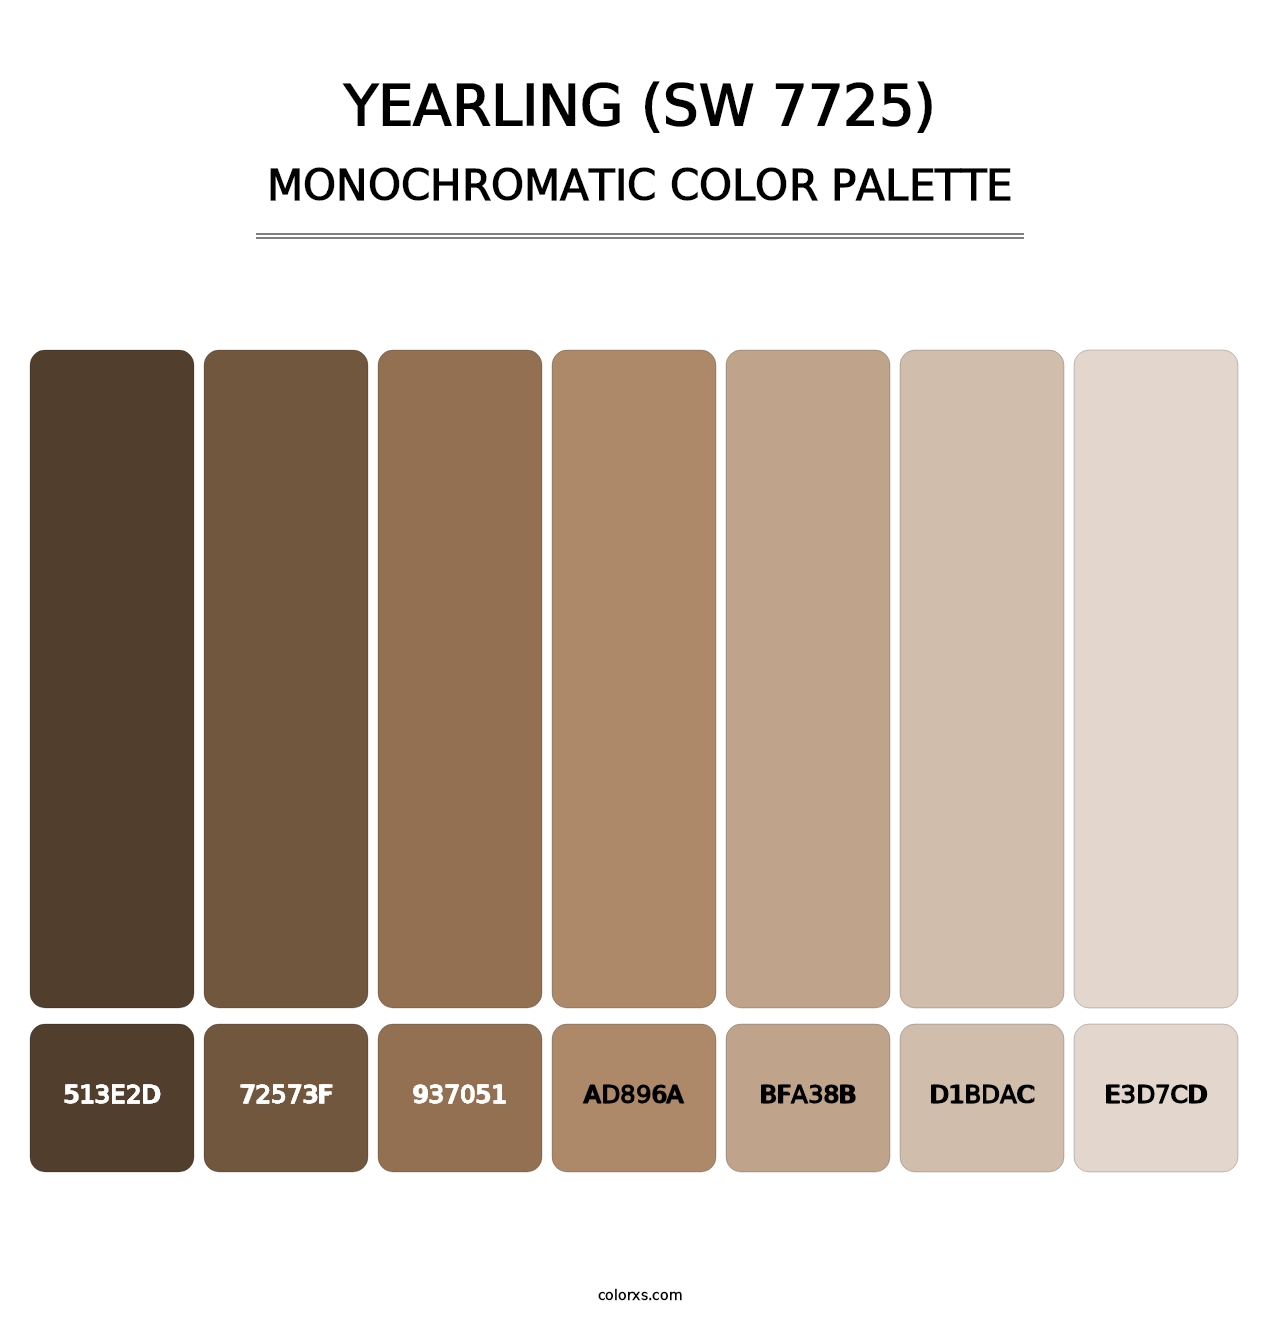 Yearling (SW 7725) - Monochromatic Color Palette